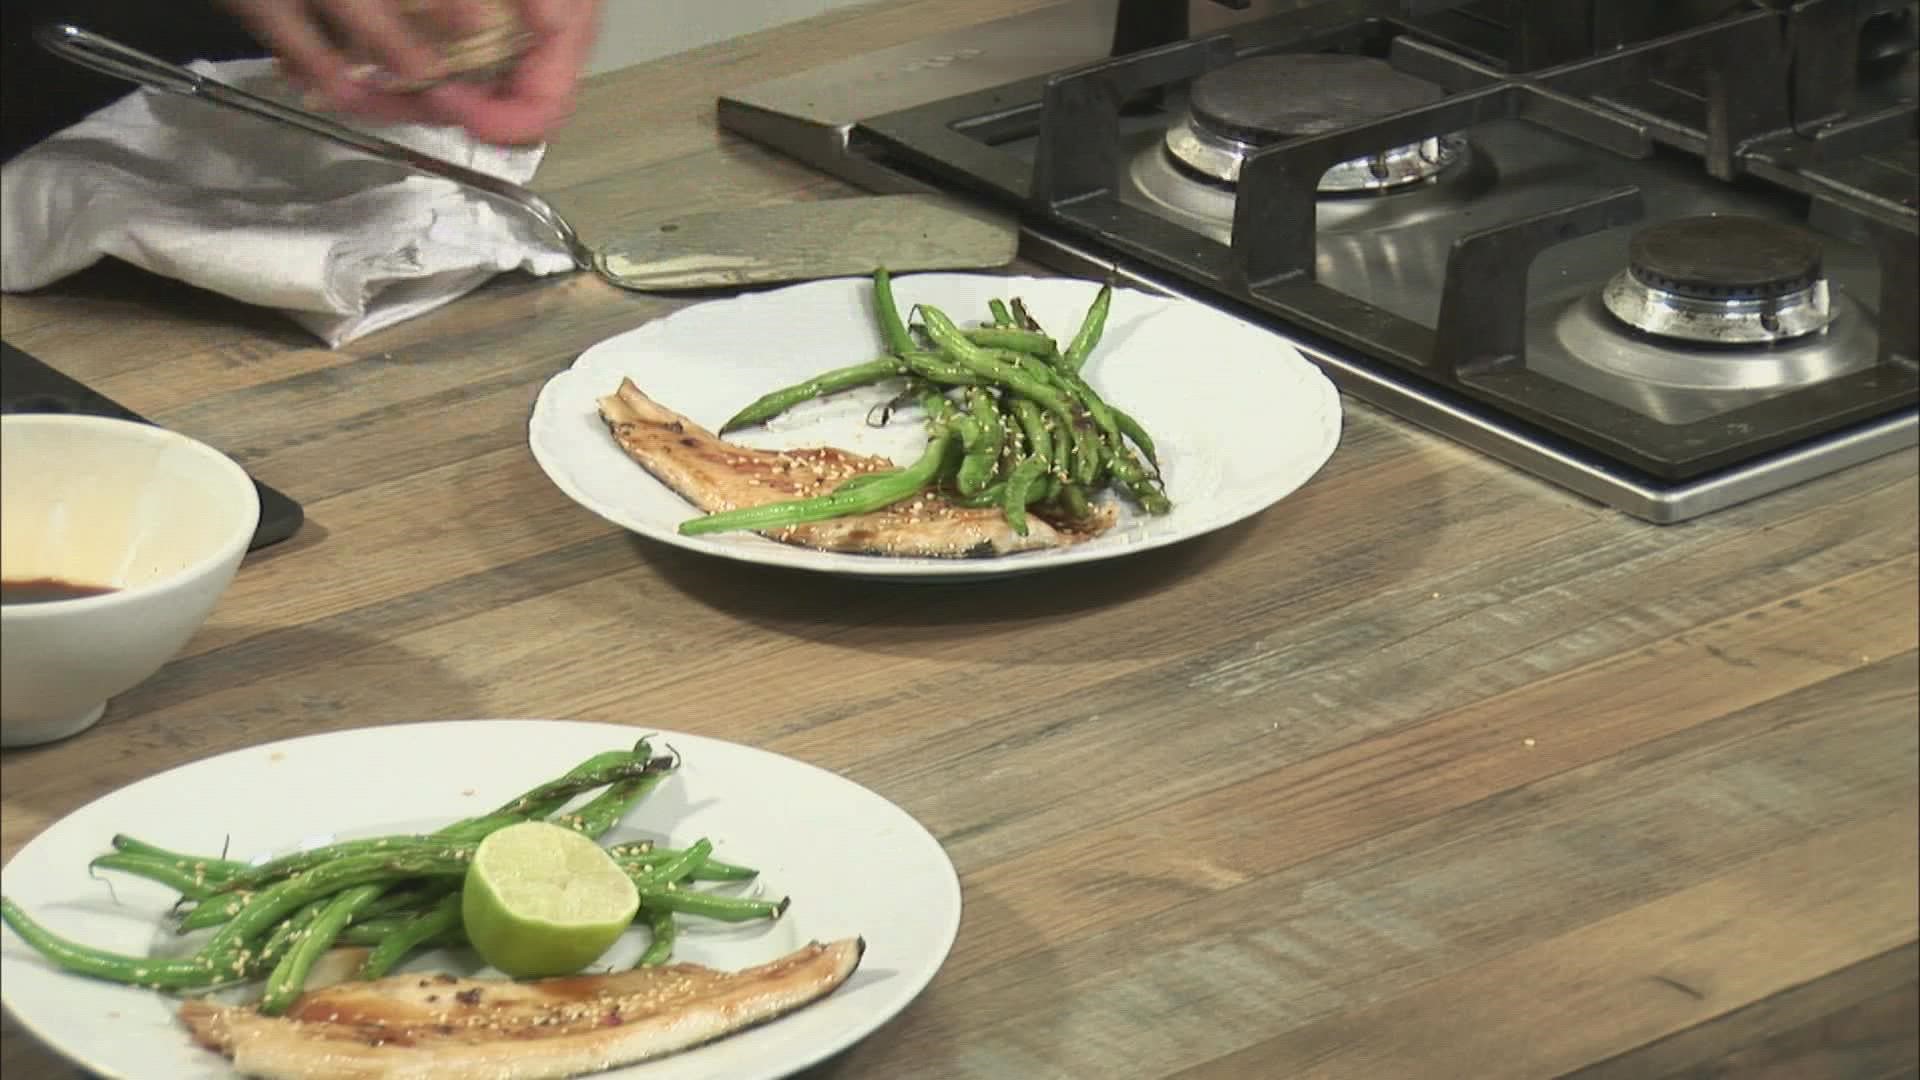 Cookbook author Kate Shaffer shares her recipe for glazed brook trout.